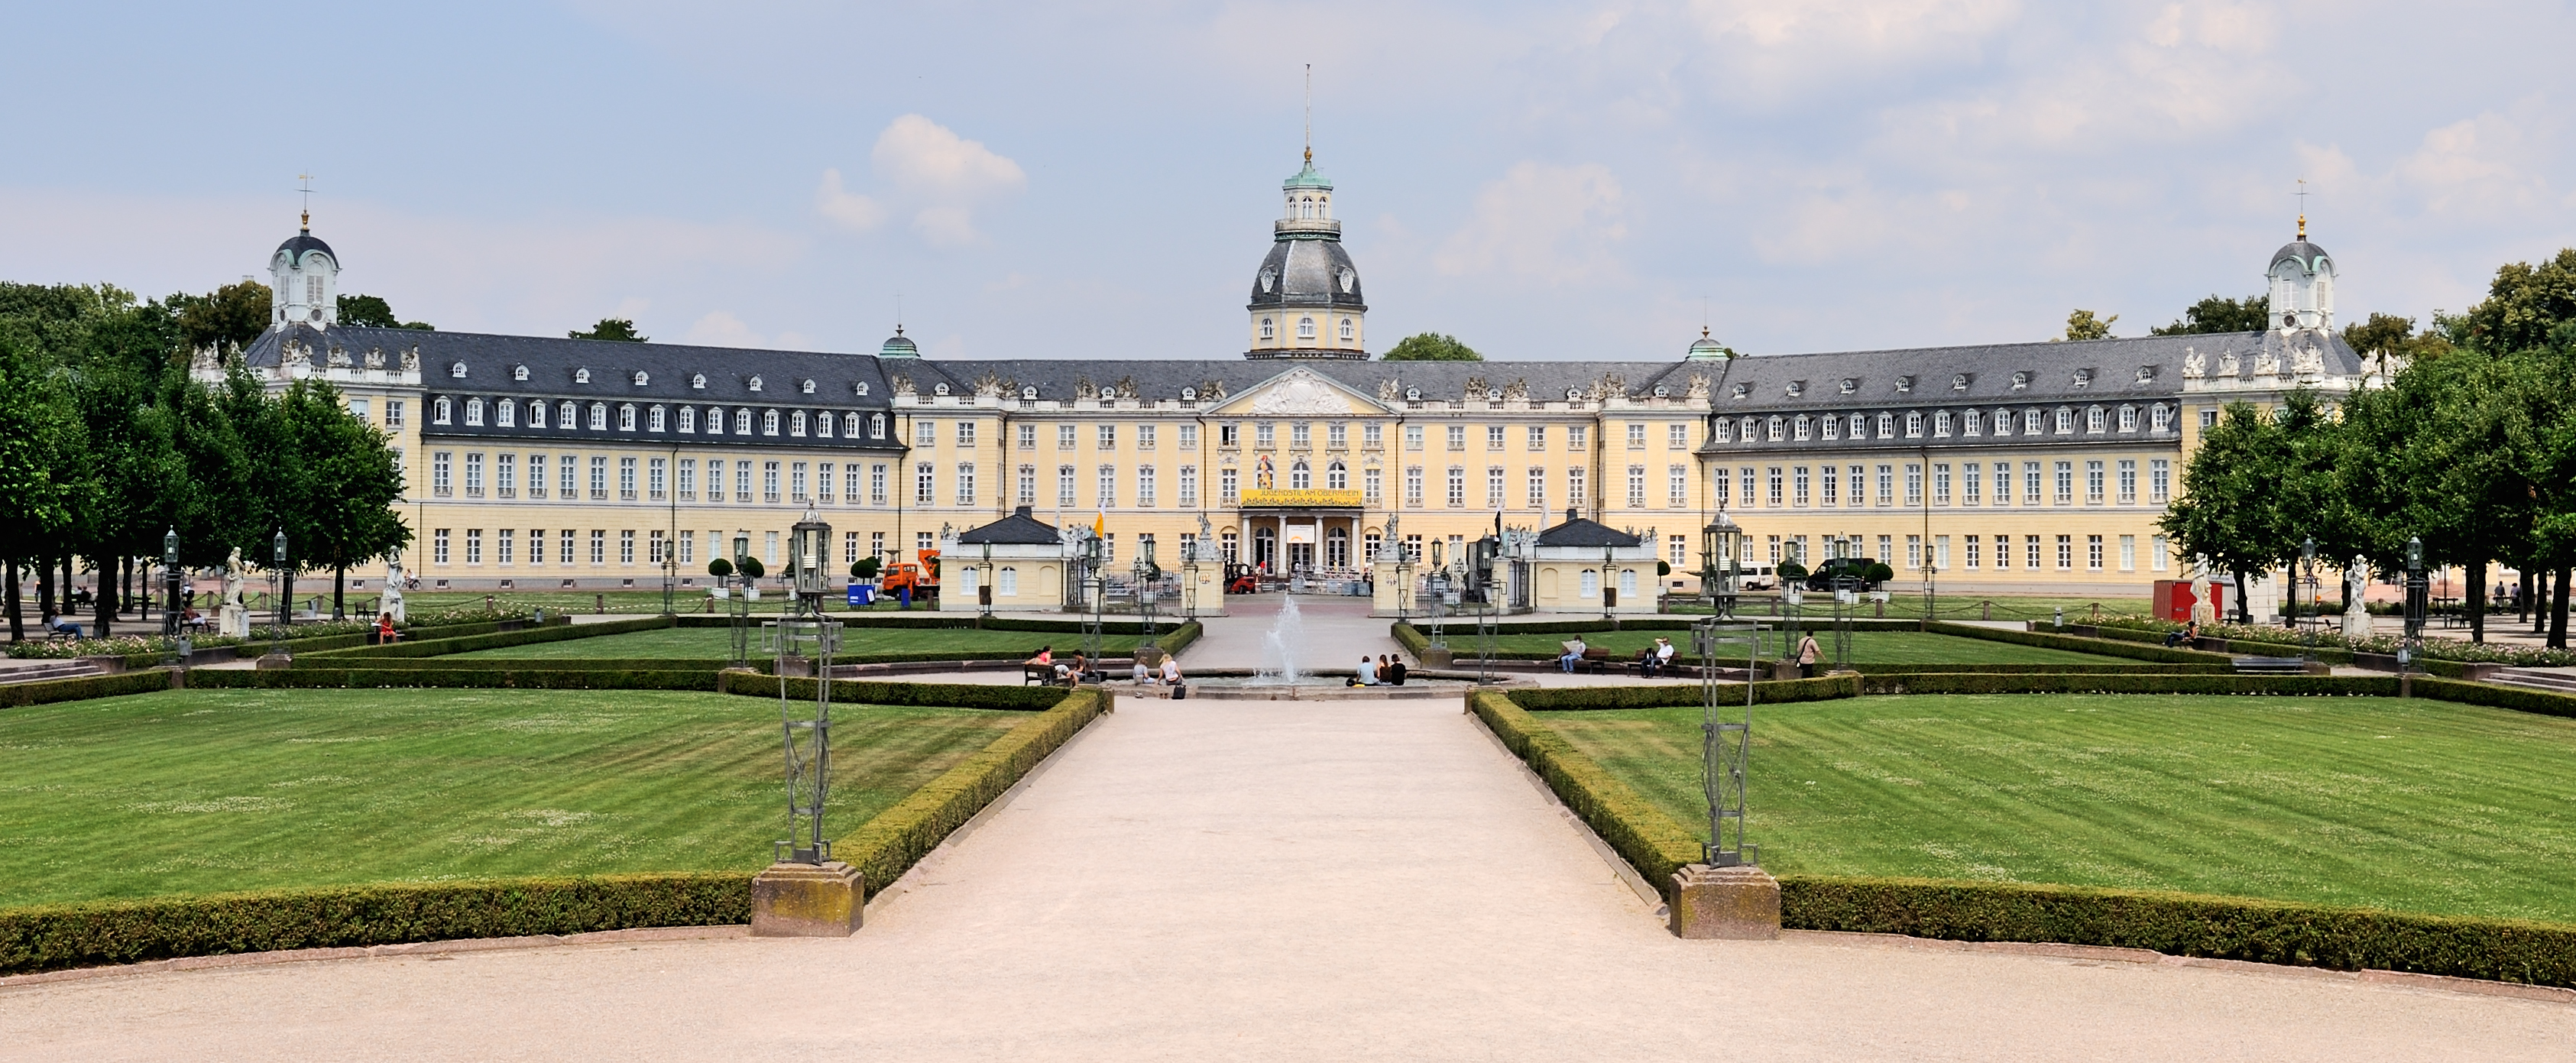 Amazing Karlsruhe Palace Pictures & Backgrounds